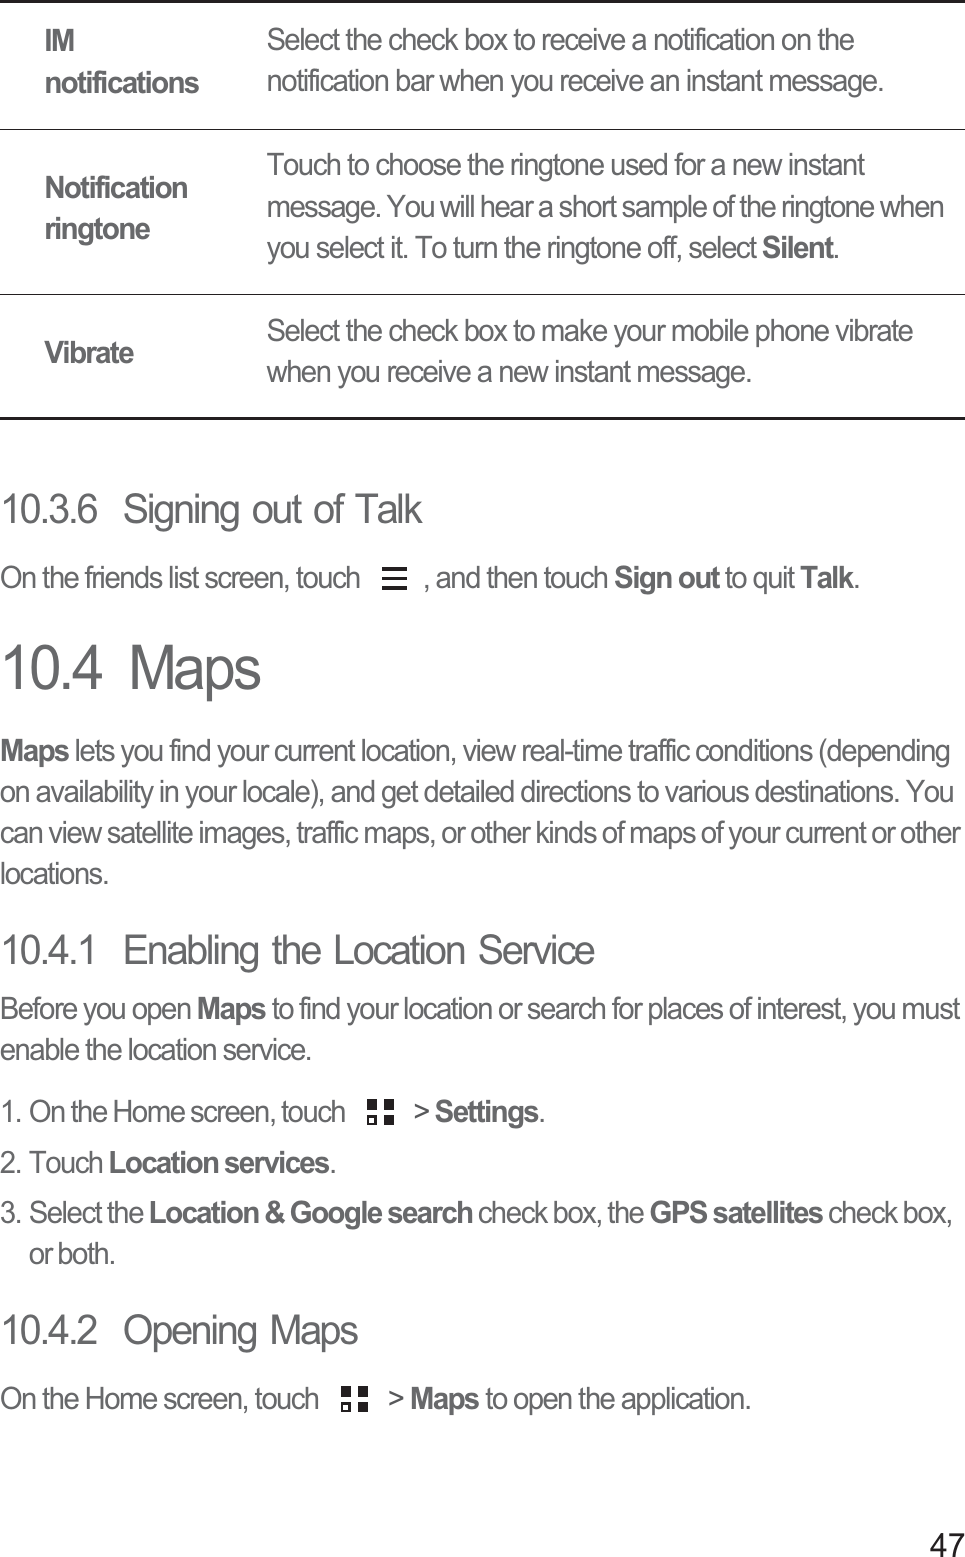 4710.3.6  Signing out of TalkOn the friends list screen, touch  , and then touch Sign out to quit Talk.10.4  MapsMaps lets you find your current location, view real-time traffic conditions (depending on availability in your locale), and get detailed directions to various destinations. You can view satellite images, traffic maps, or other kinds of maps of your current or other locations.10.4.1  Enabling the Location ServiceBefore you open Maps to find your location or search for places of interest, you must enable the location service.1. On the Home screen, touch   &gt; Settings.2. Touch Location services.3. Select the Location &amp; Google search check box, the GPS satellites check box, or both.10.4.2  Opening MapsOn the Home screen, touch   &gt; Maps to open the application.IM notificationsSelect the check box to receive a notification on the notification bar when you receive an instant message.Notification ringtoneTouch to choose the ringtone used for a new instant message. You will hear a short sample of the ringtone when you select it. To turn the ringtone off, select Silent.VibrateSelect the check box to make your mobile phone vibrate when you receive a new instant message.